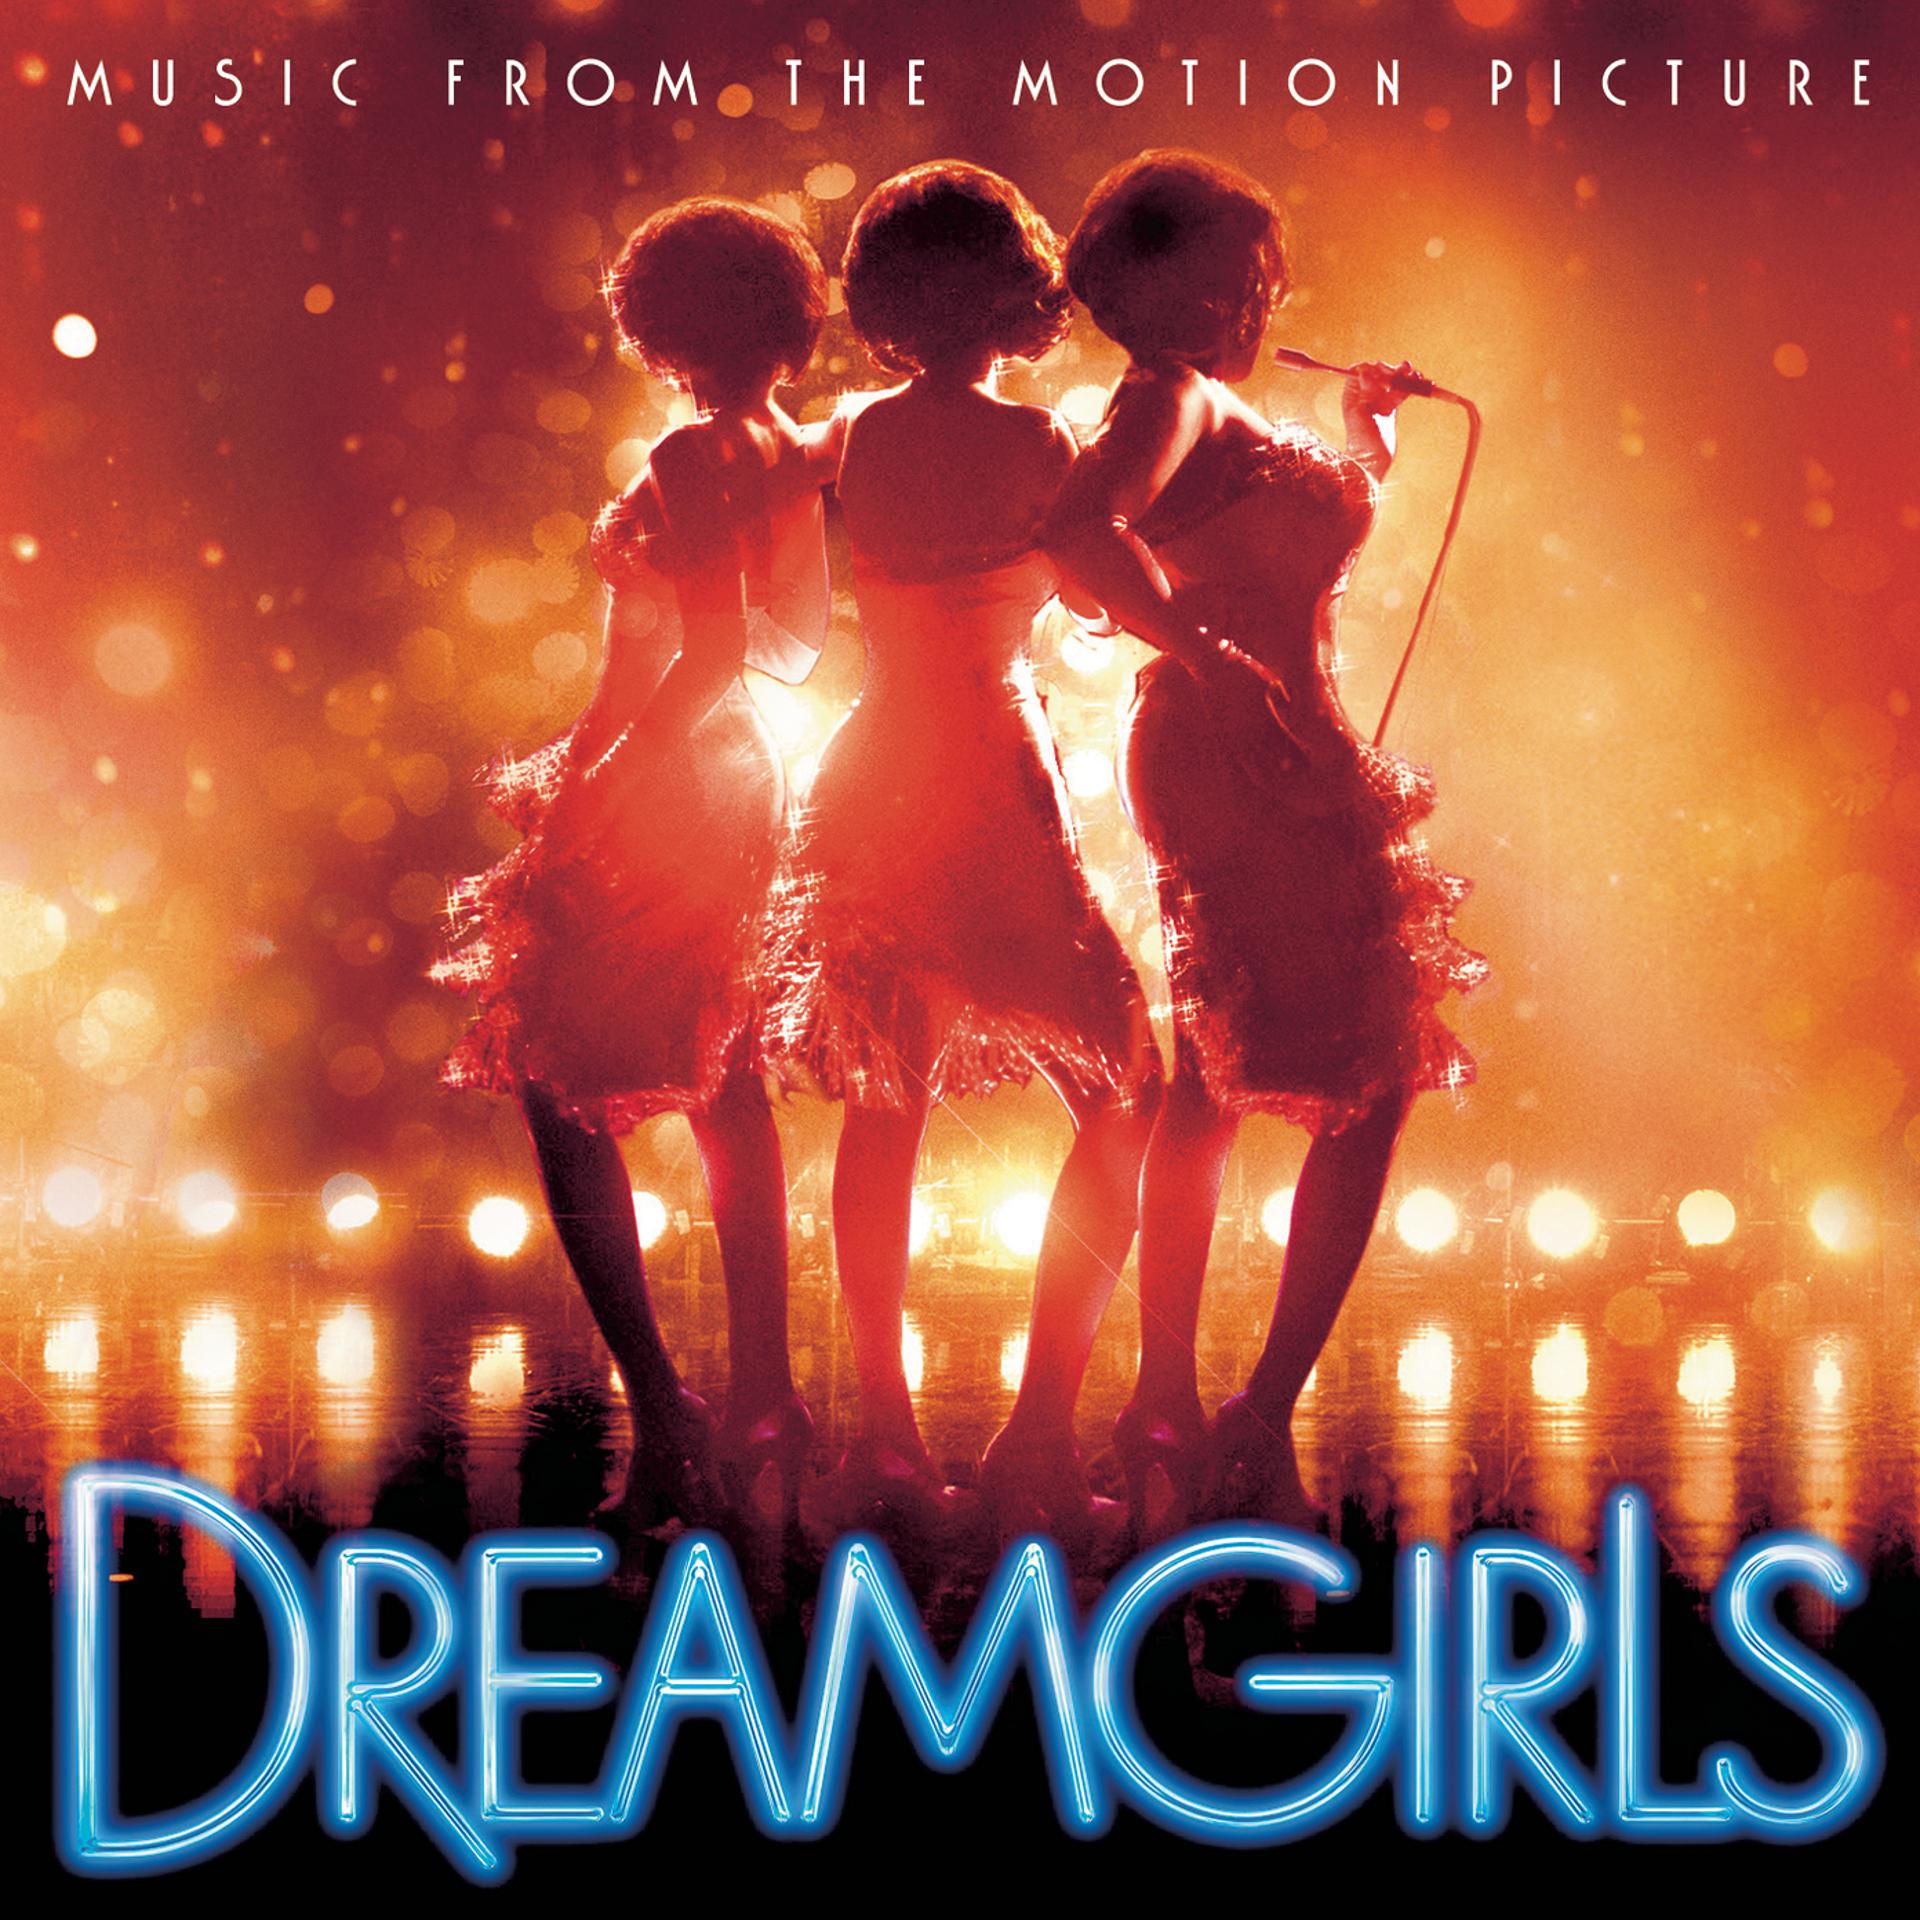 Girl soundtrack. Beyonce Dreamgirls. Music from the Motion picture. Dream girl девушка мечты.